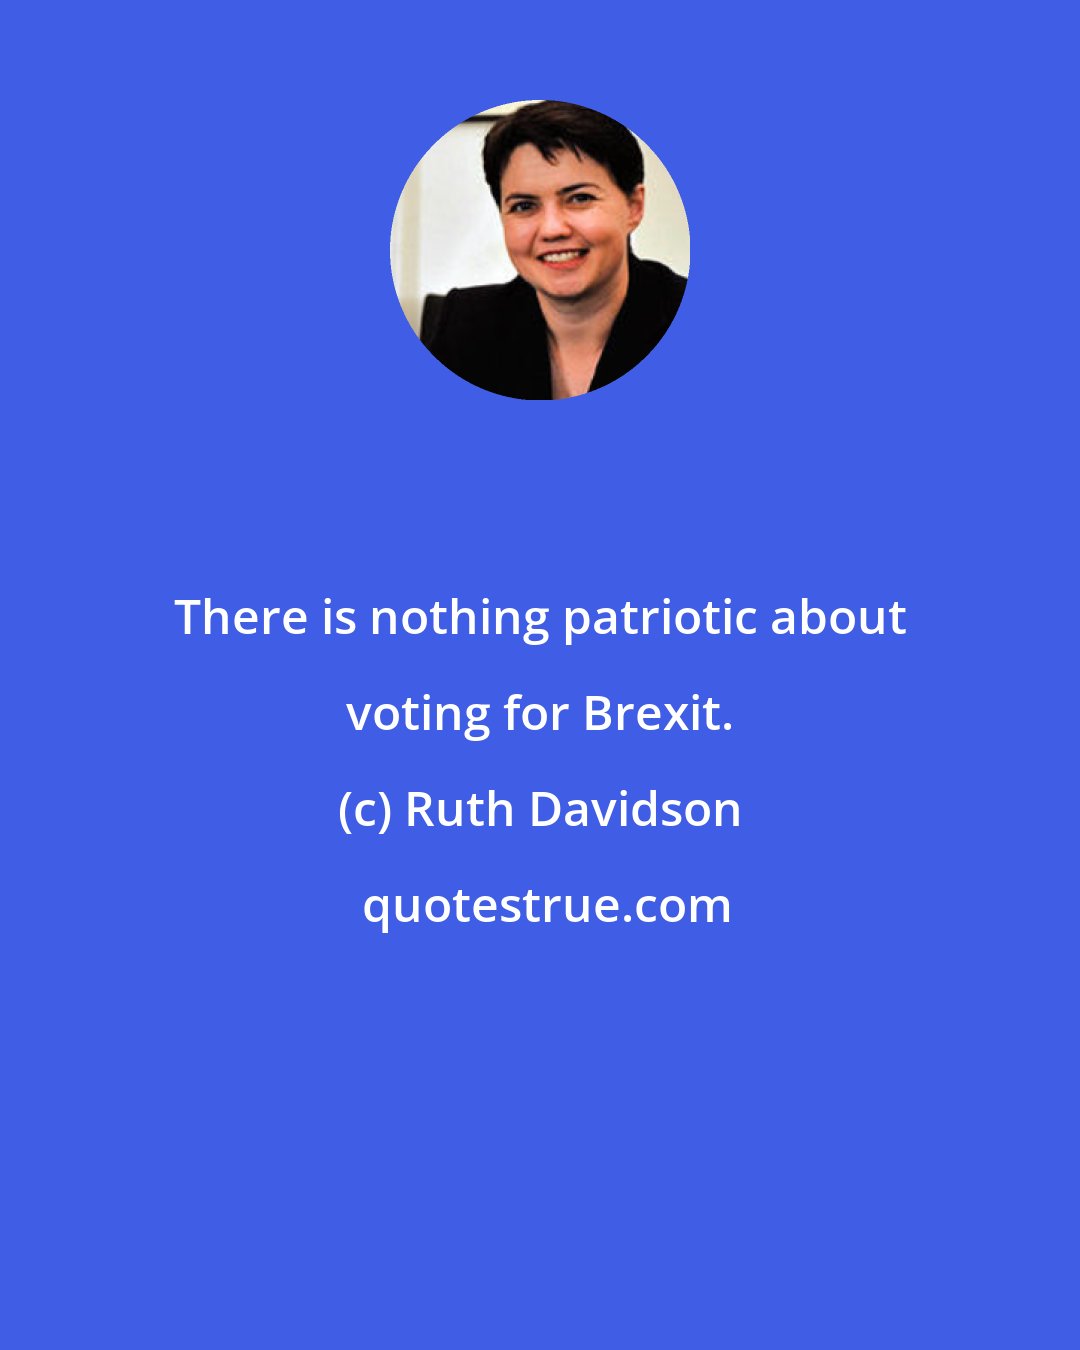 Ruth Davidson: There is nothing patriotic about voting for Brexit.